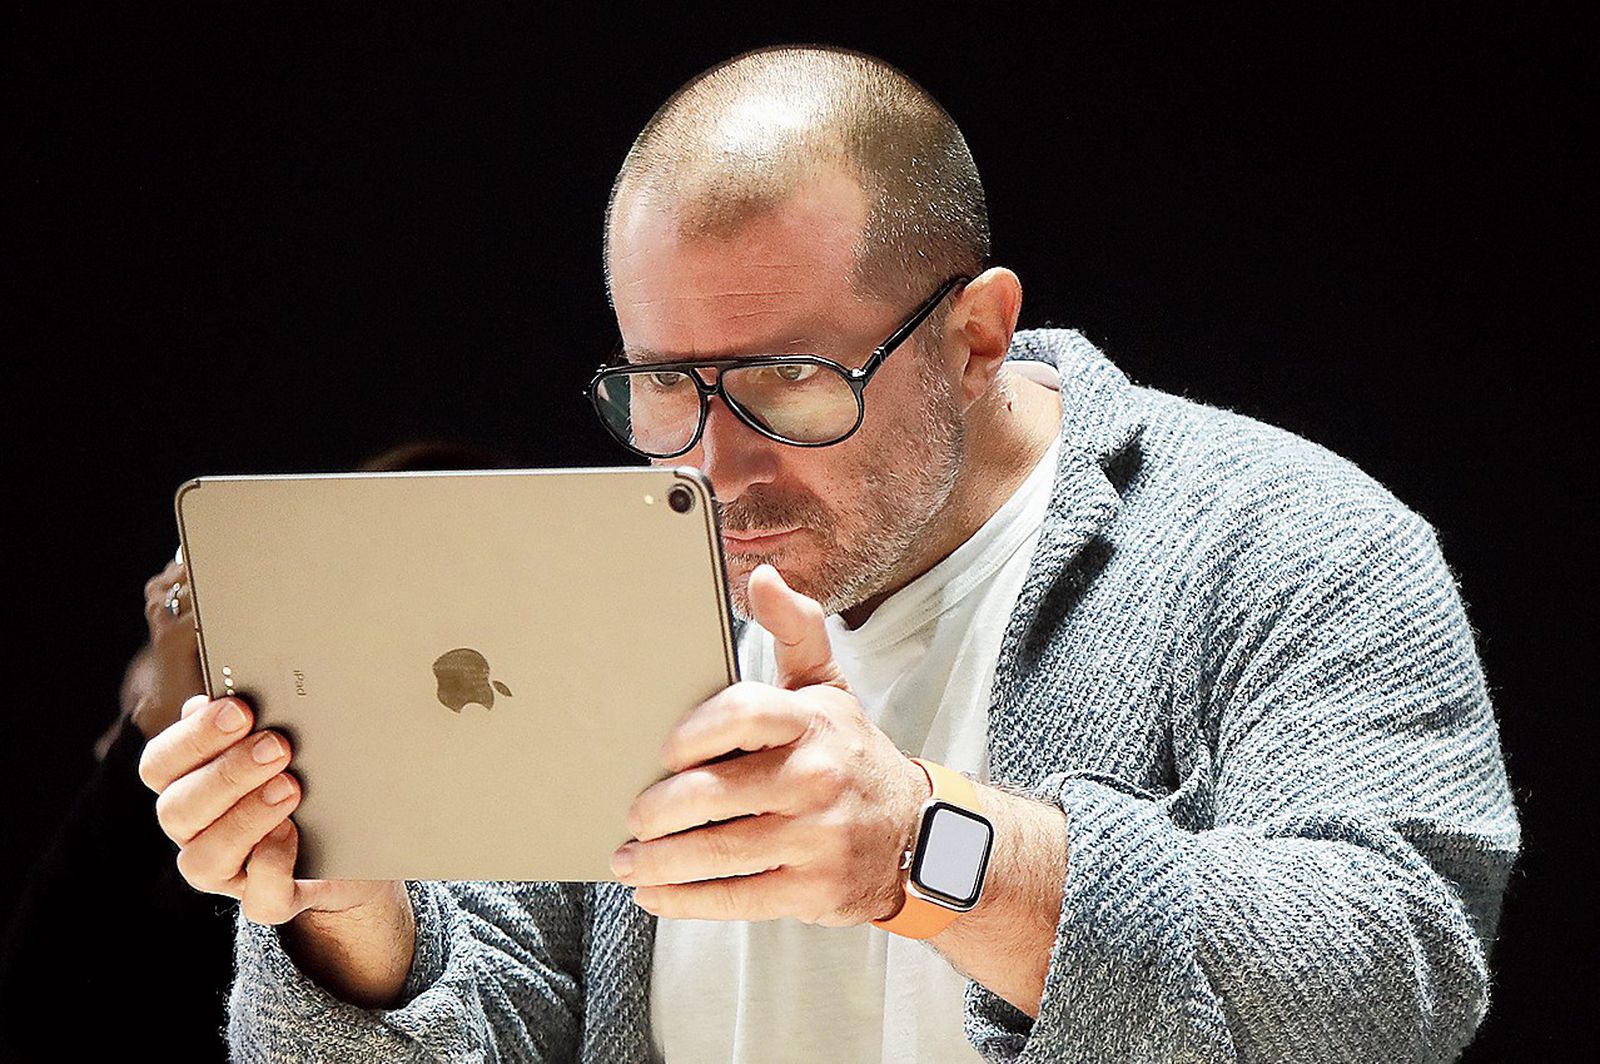 Apple's Former Design Chief Jony Ive to Speak at WIRED Event Next Week